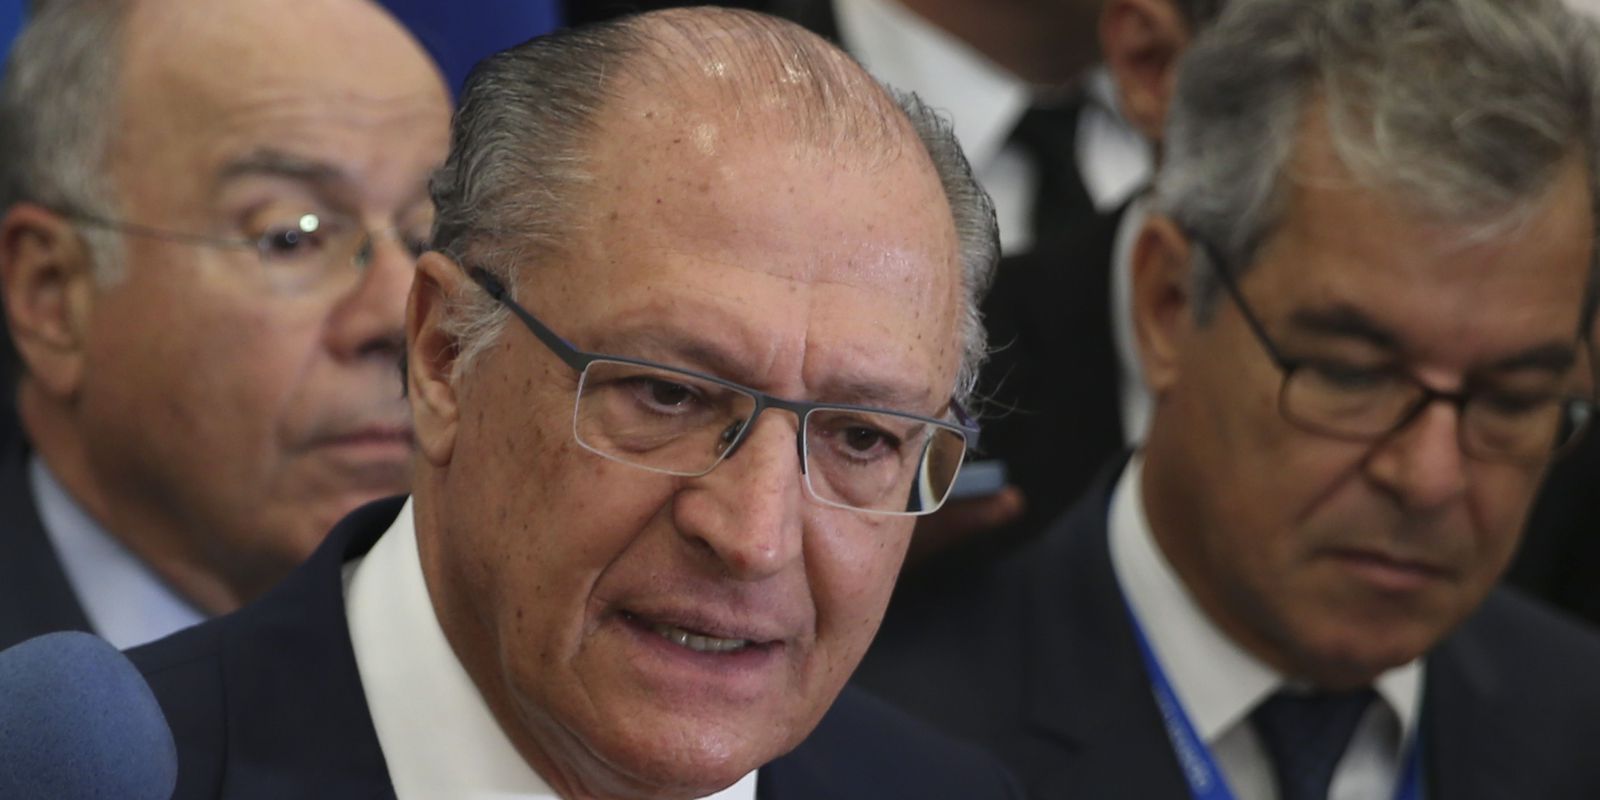 Tax reform is a central issue for the government, says Alckmin